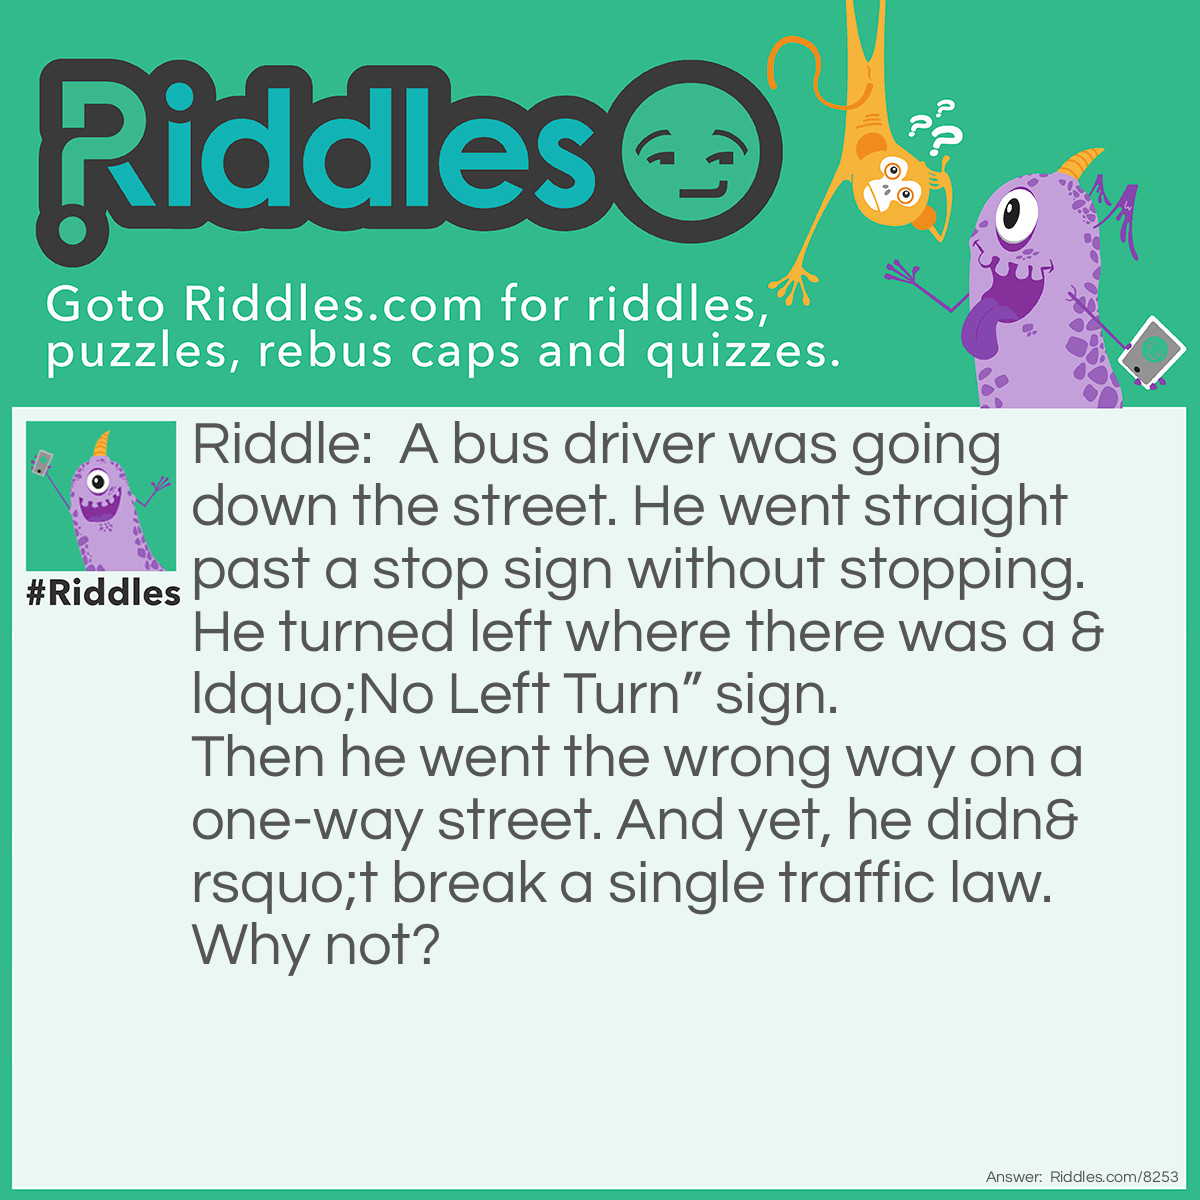 Riddle: A bus driver was going down the street. He went straight past a stop sign without stopping. He turned left where there was a "No Left Turn" sign. Then he went the wrong way on a one-way street. And yet, he didn't break a single traffic law. Why not? Answer: The bus driver was walking and wasn’t working.